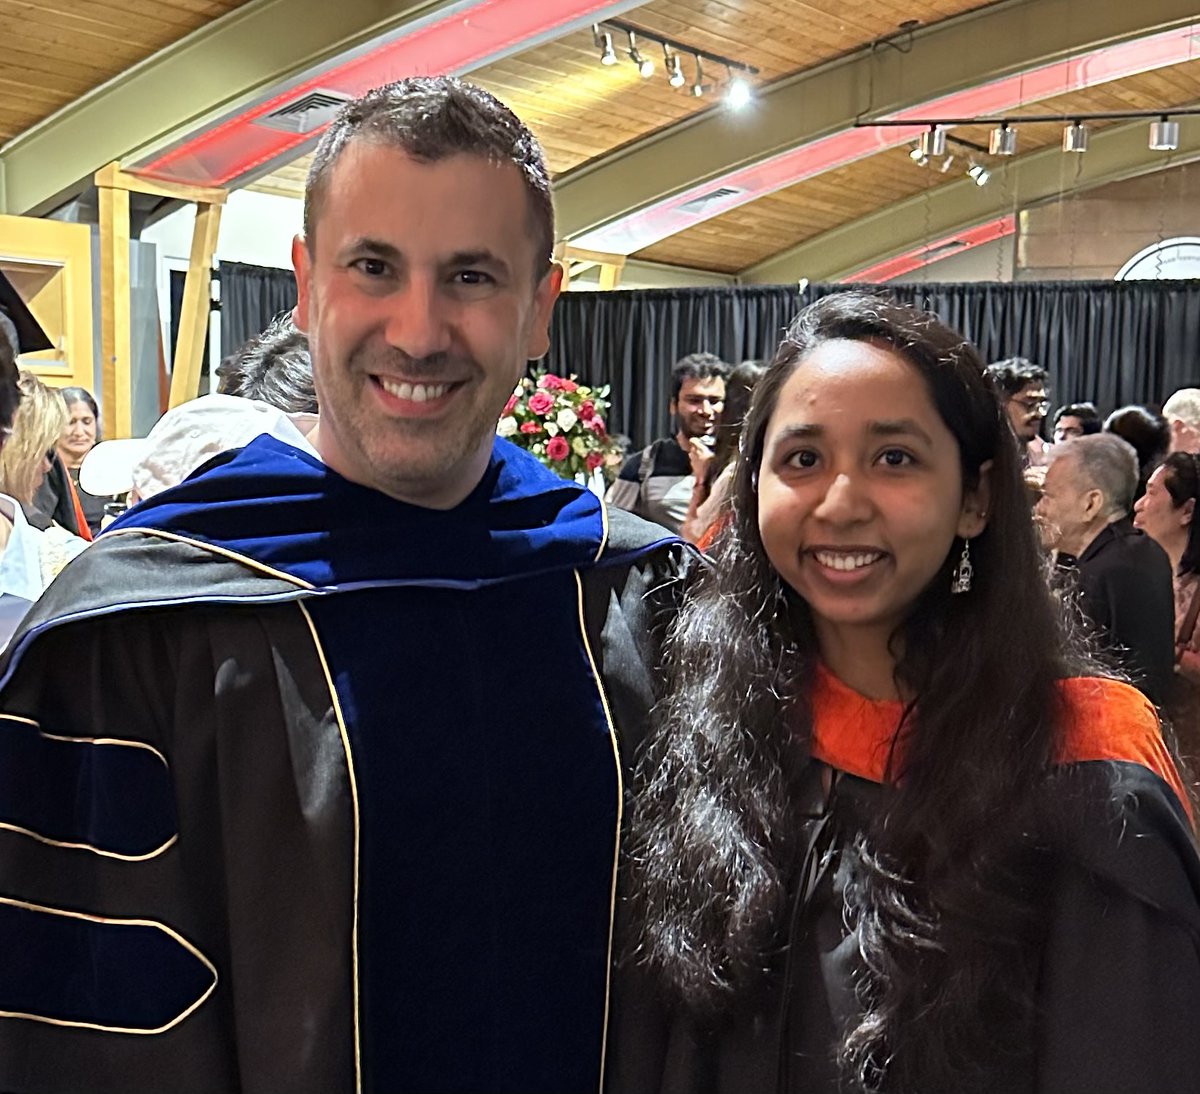 Grad highlight - Ms. Shubhangi Sathyakumar @parasitessk graduated in May 2023 with her Masters in Biomedical Engineering @cmu_bme where she developed engineered endothelial tubule segments for tissue vascularization, we're excited to have her continue on for her PhD in the lab!